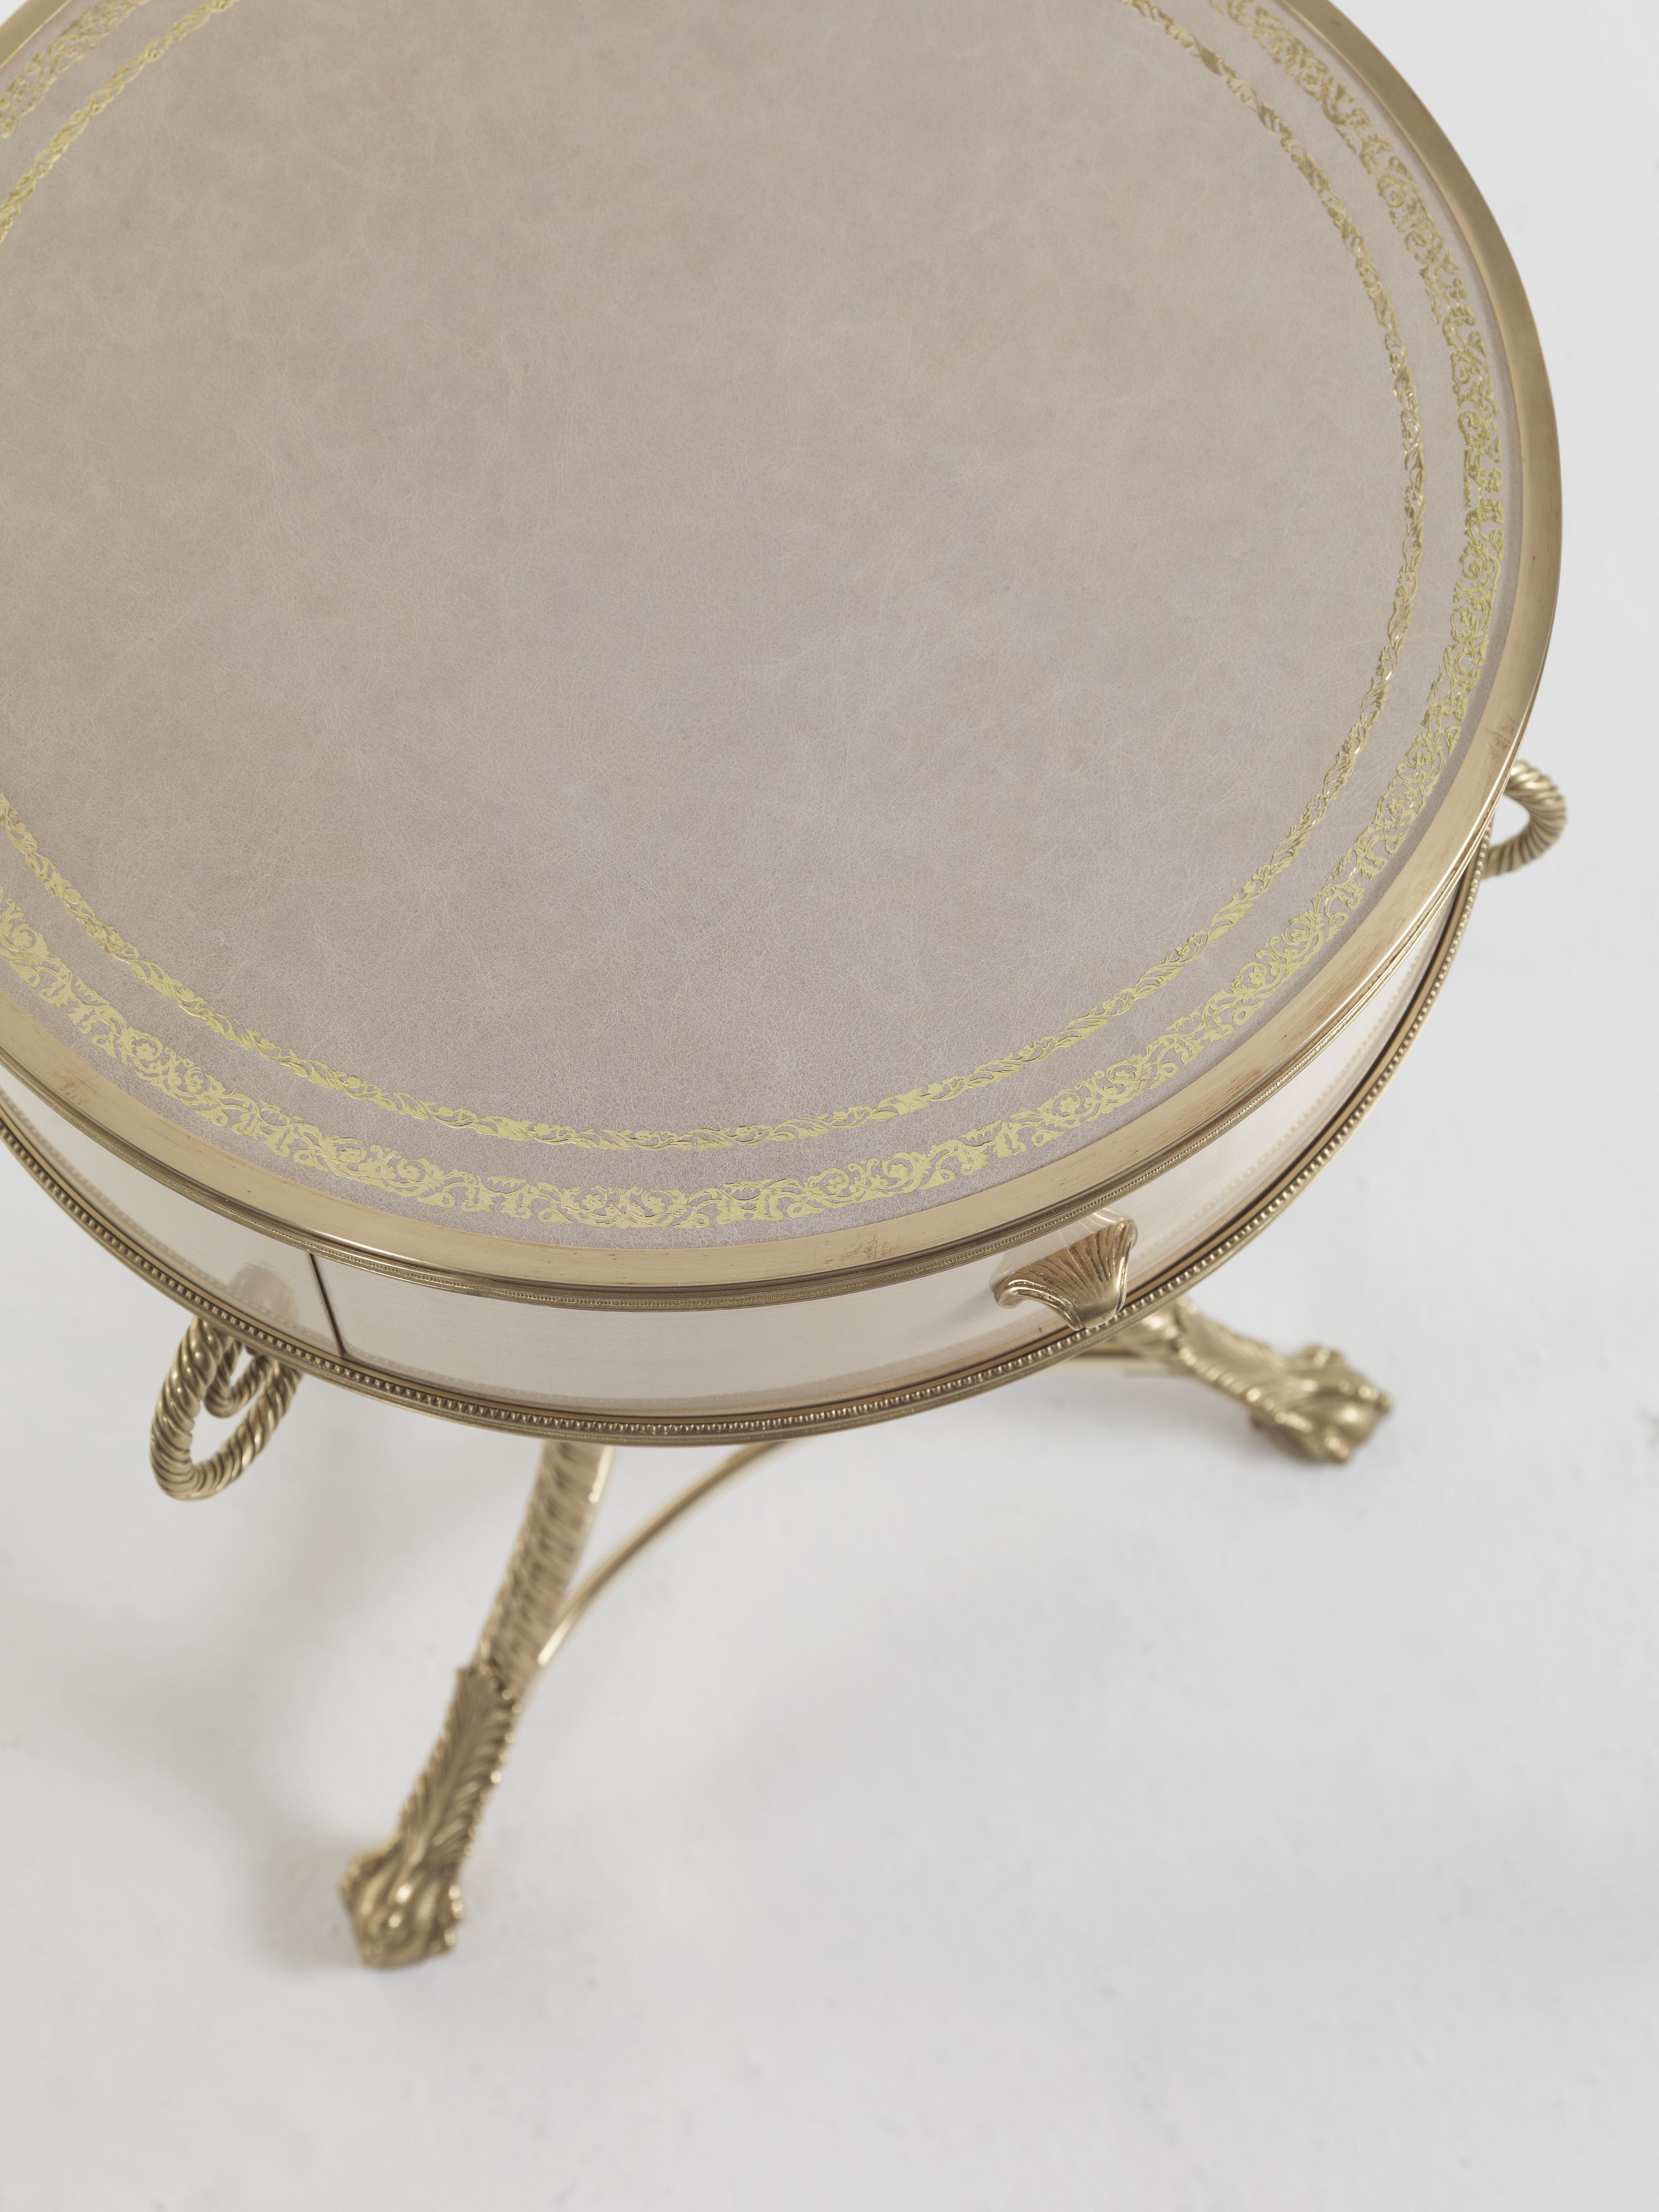 Italian 21st Century Torchon Night Table with Base in Brass and Leather Top For Sale